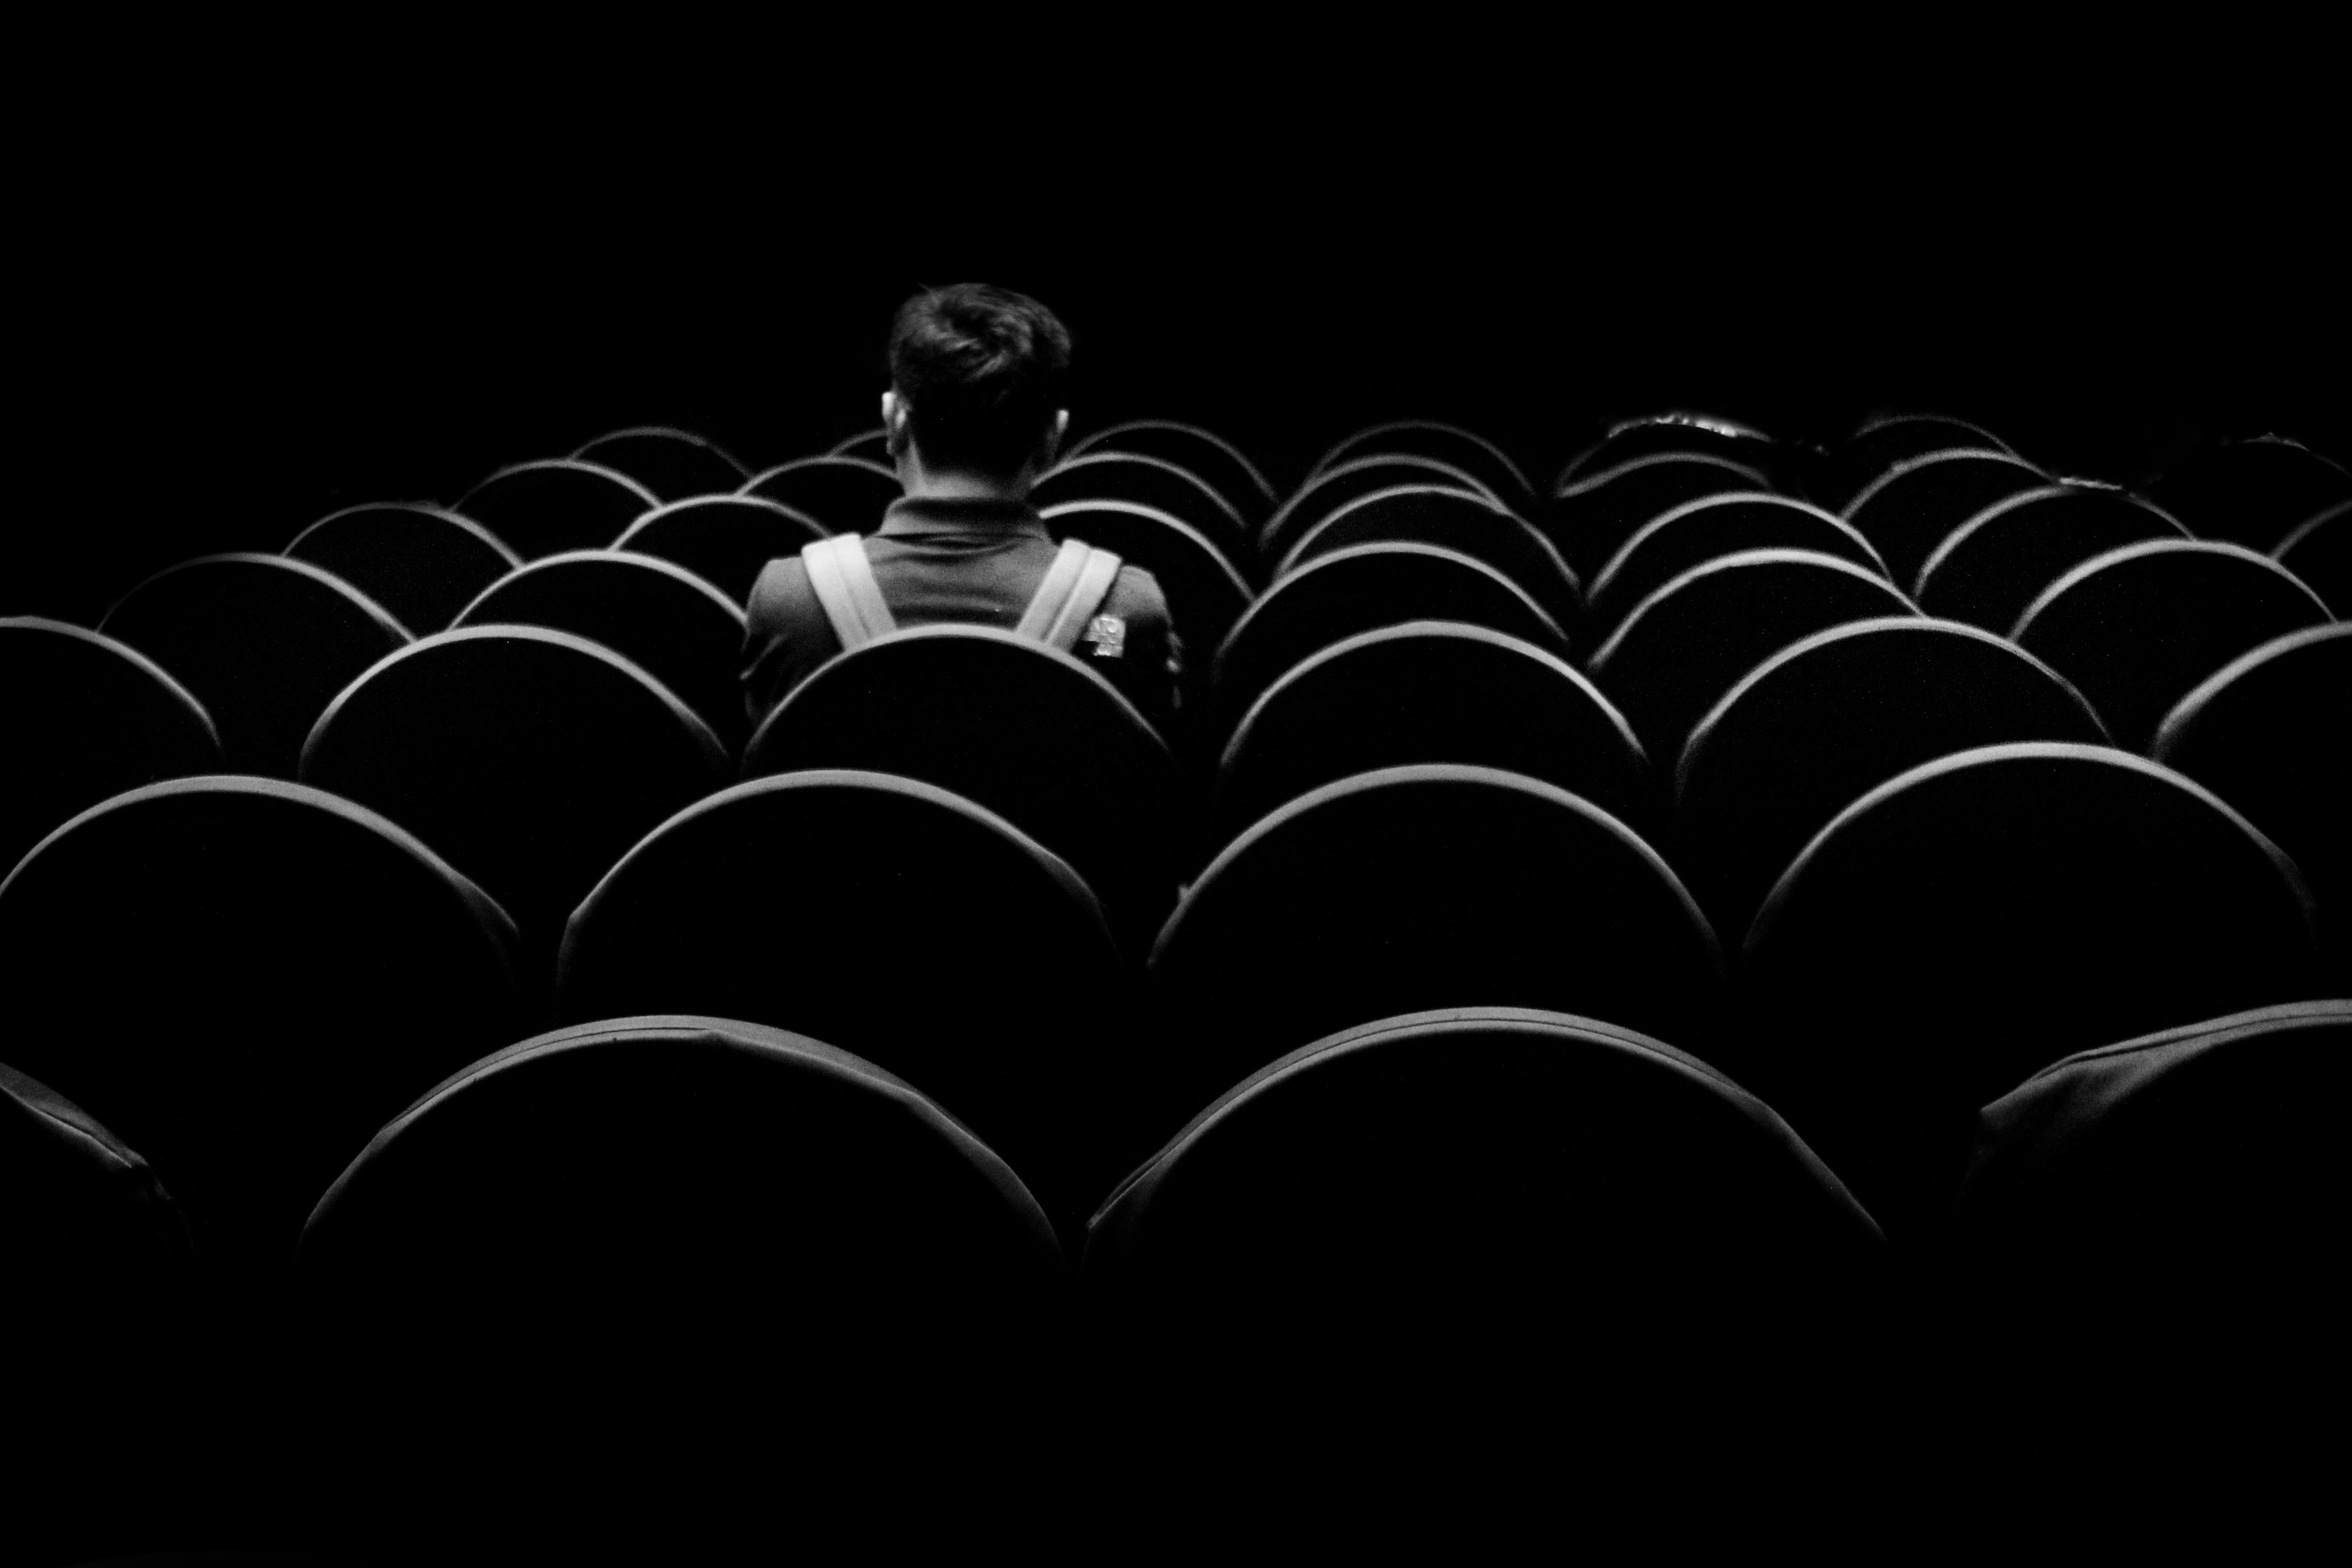 darkness, black, chb, bw, human, person, loneliness images